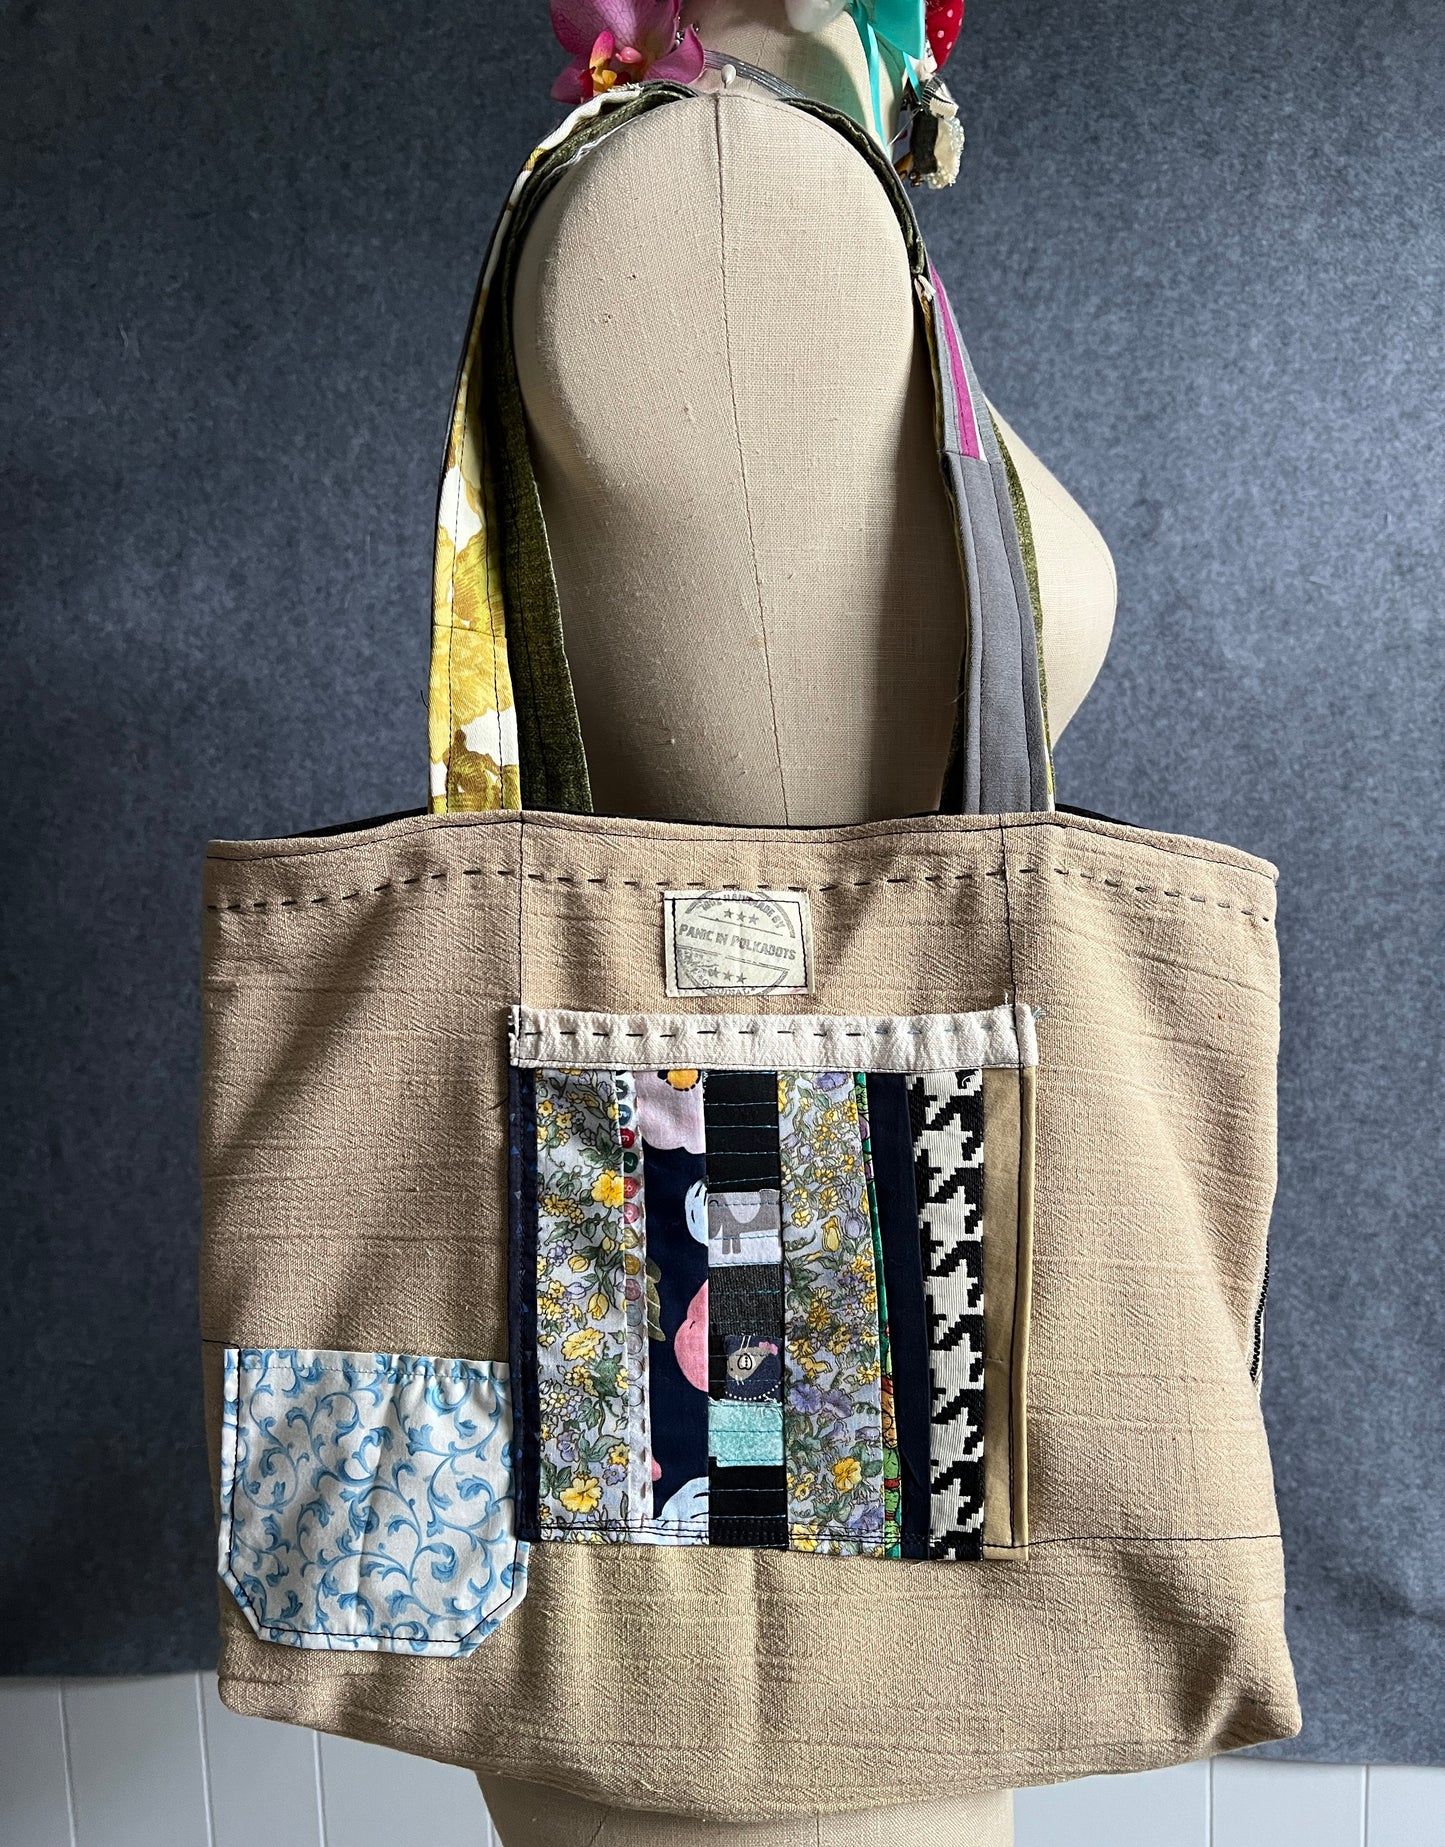 Big Sustainable Tote Bag - Denim and Khaki Scraps - Fully Lined with Pockets!